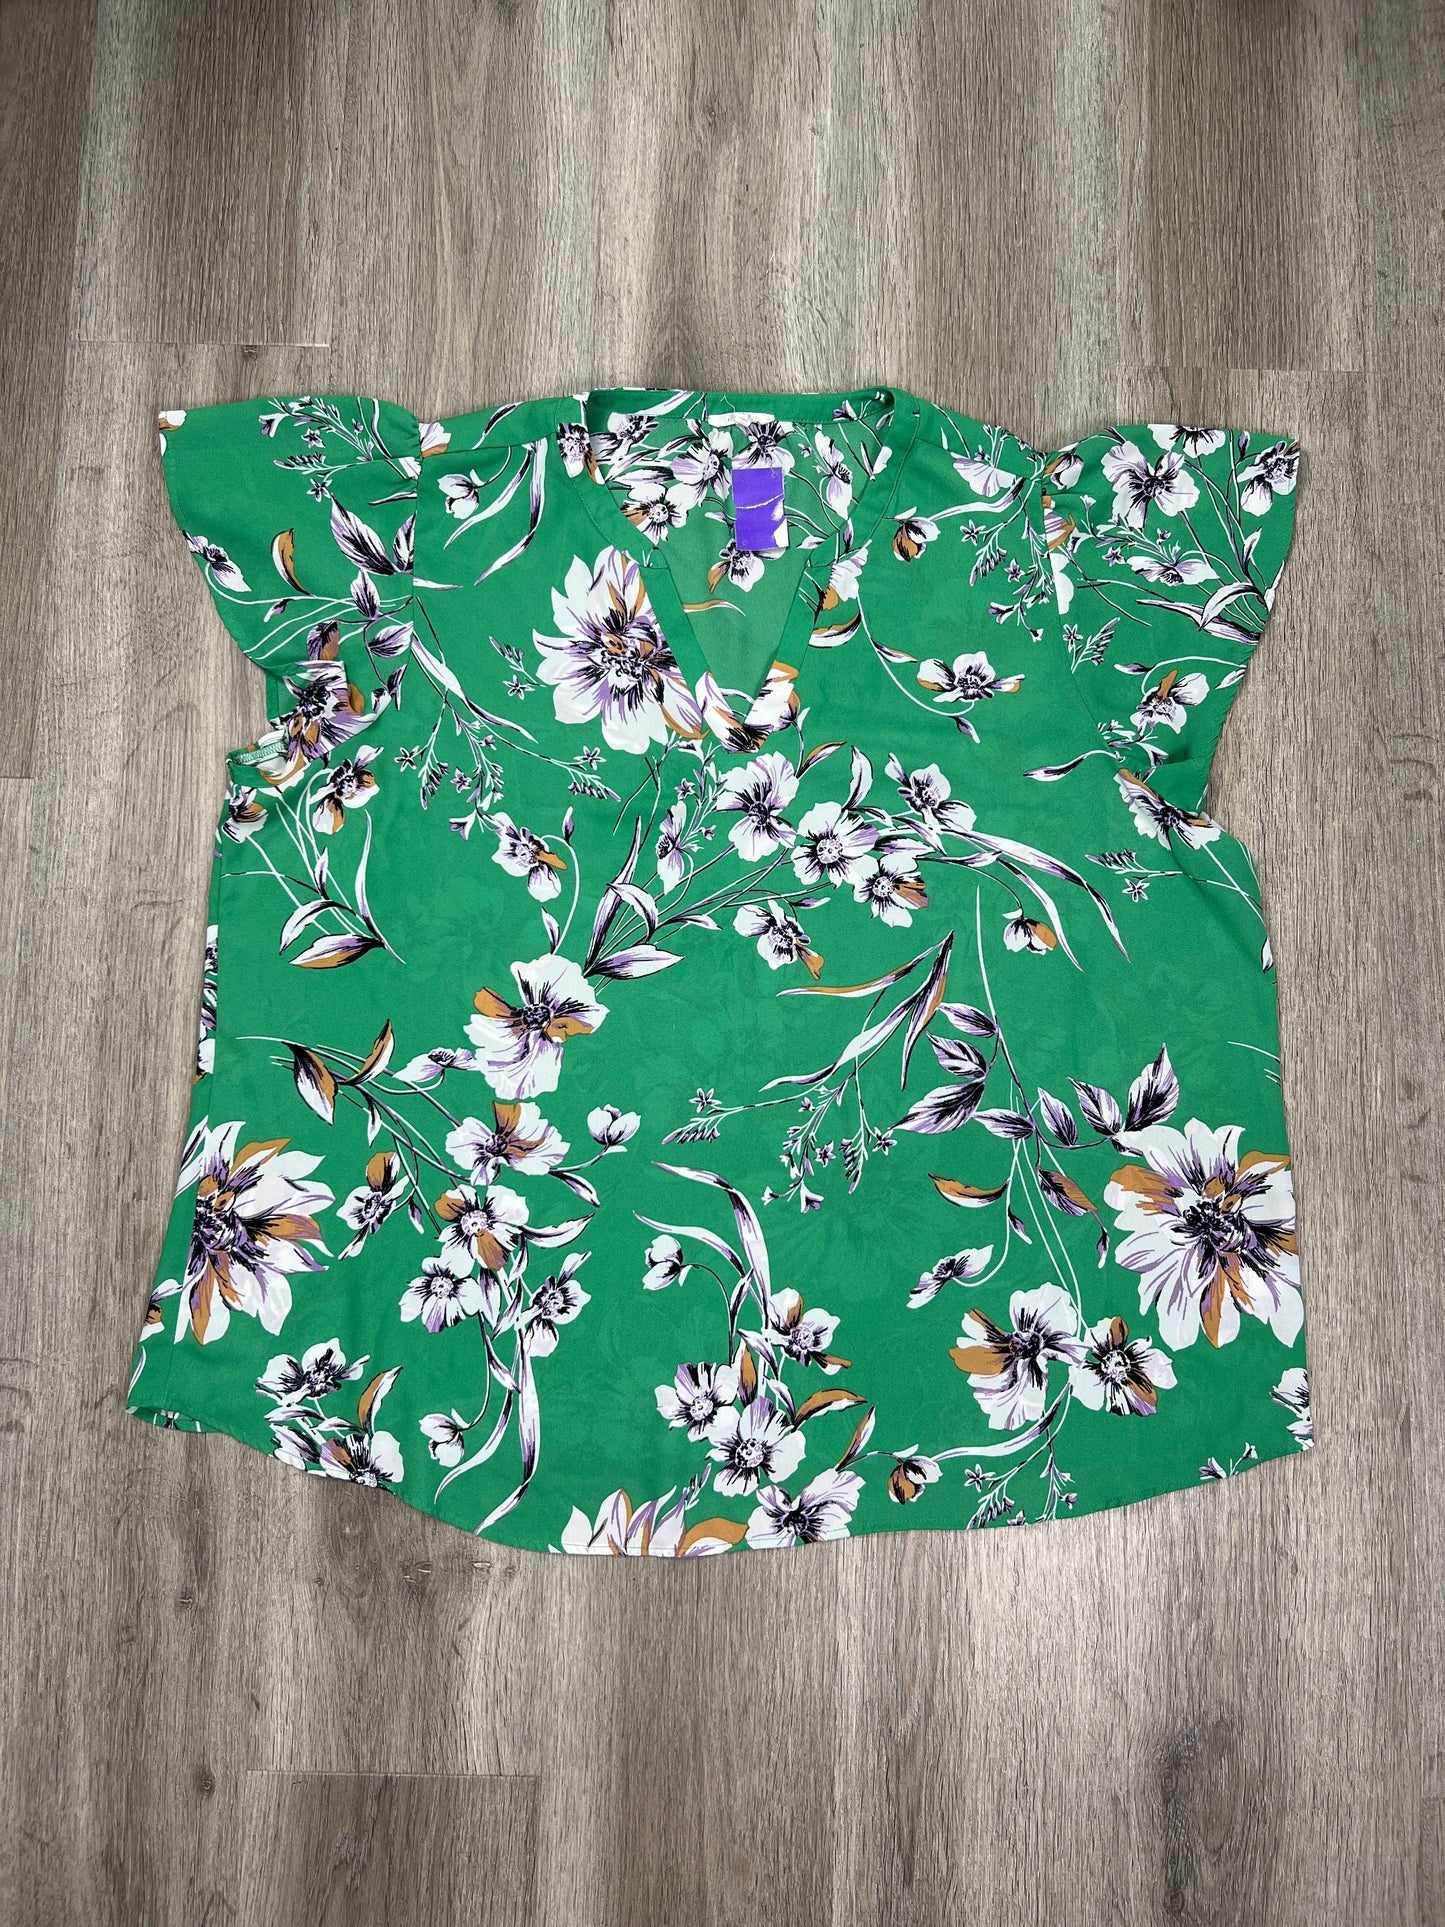 Green Top Short Sleeve Maurices, Size 2x